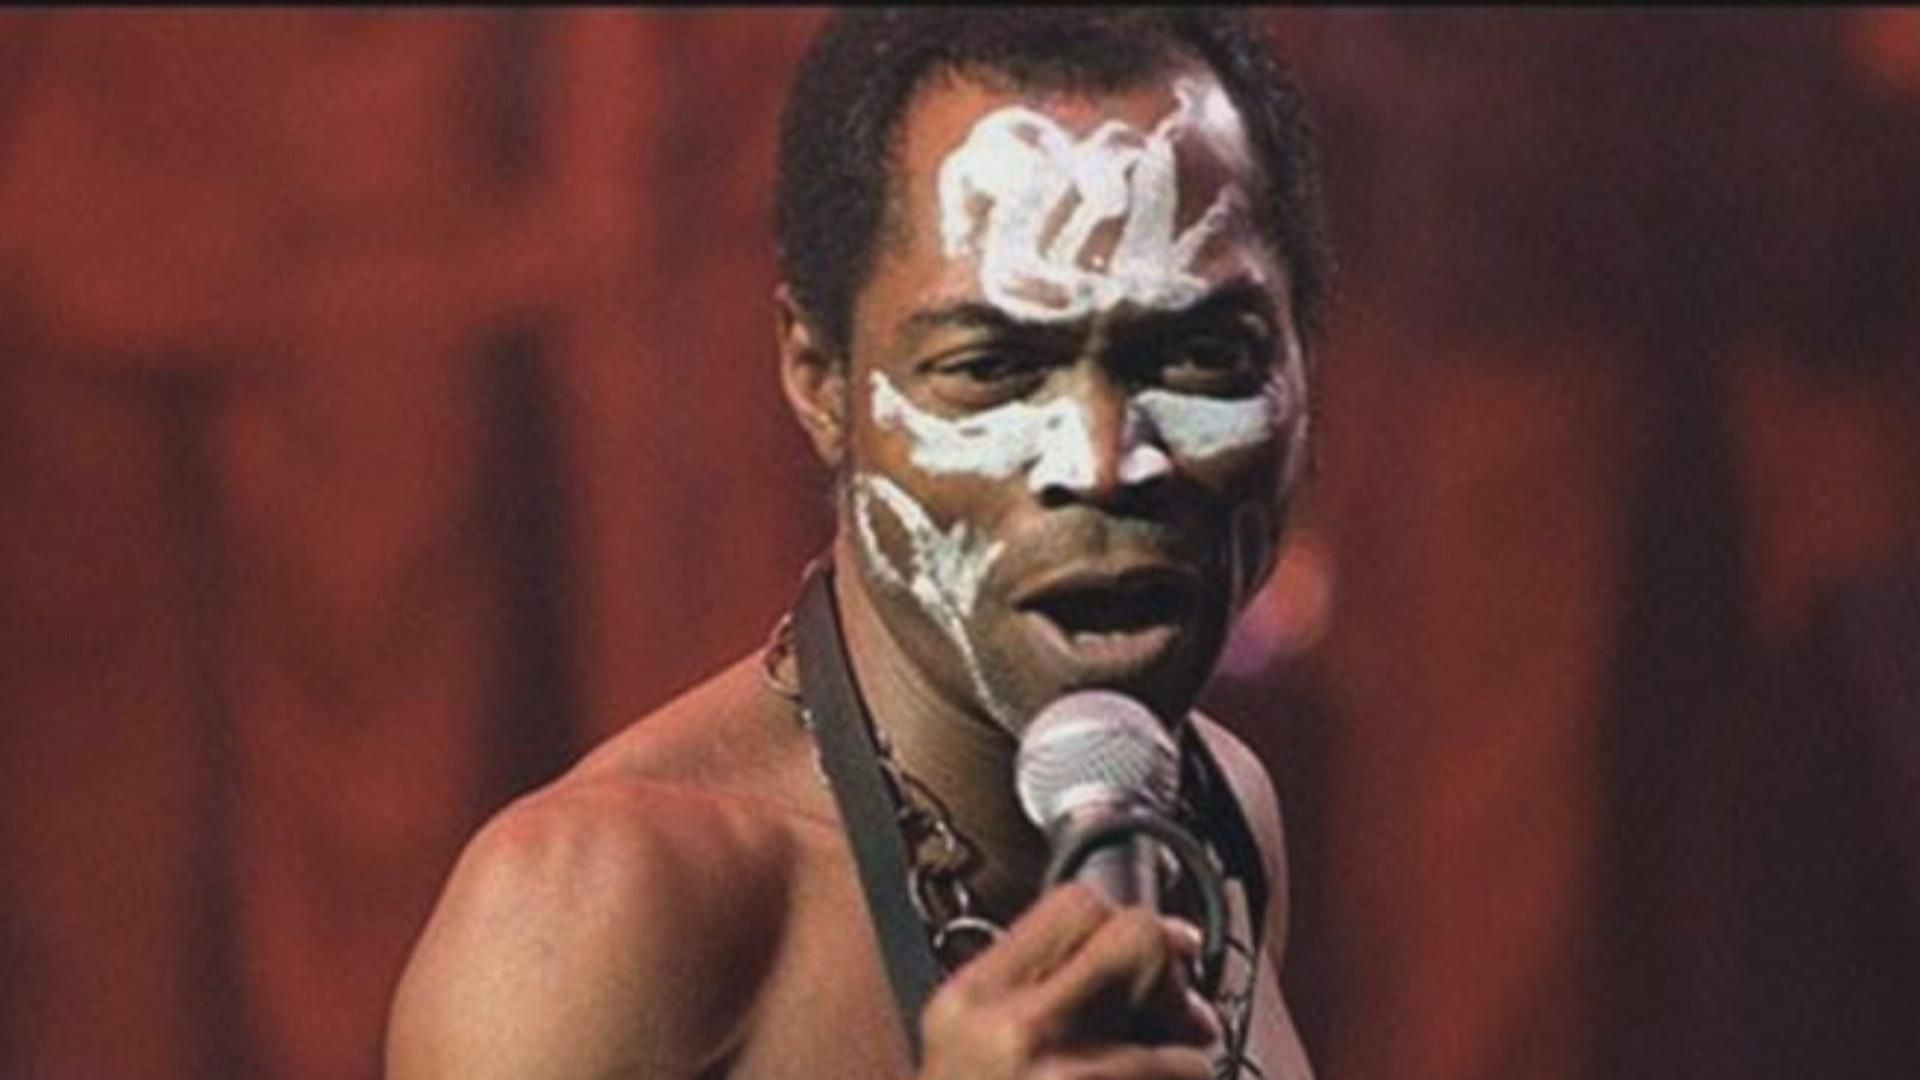 An Introduction to the Life & Music of Fela Kuti: Radical Nigerian Bandleader, Political Hero, and Creator of Afrobeat